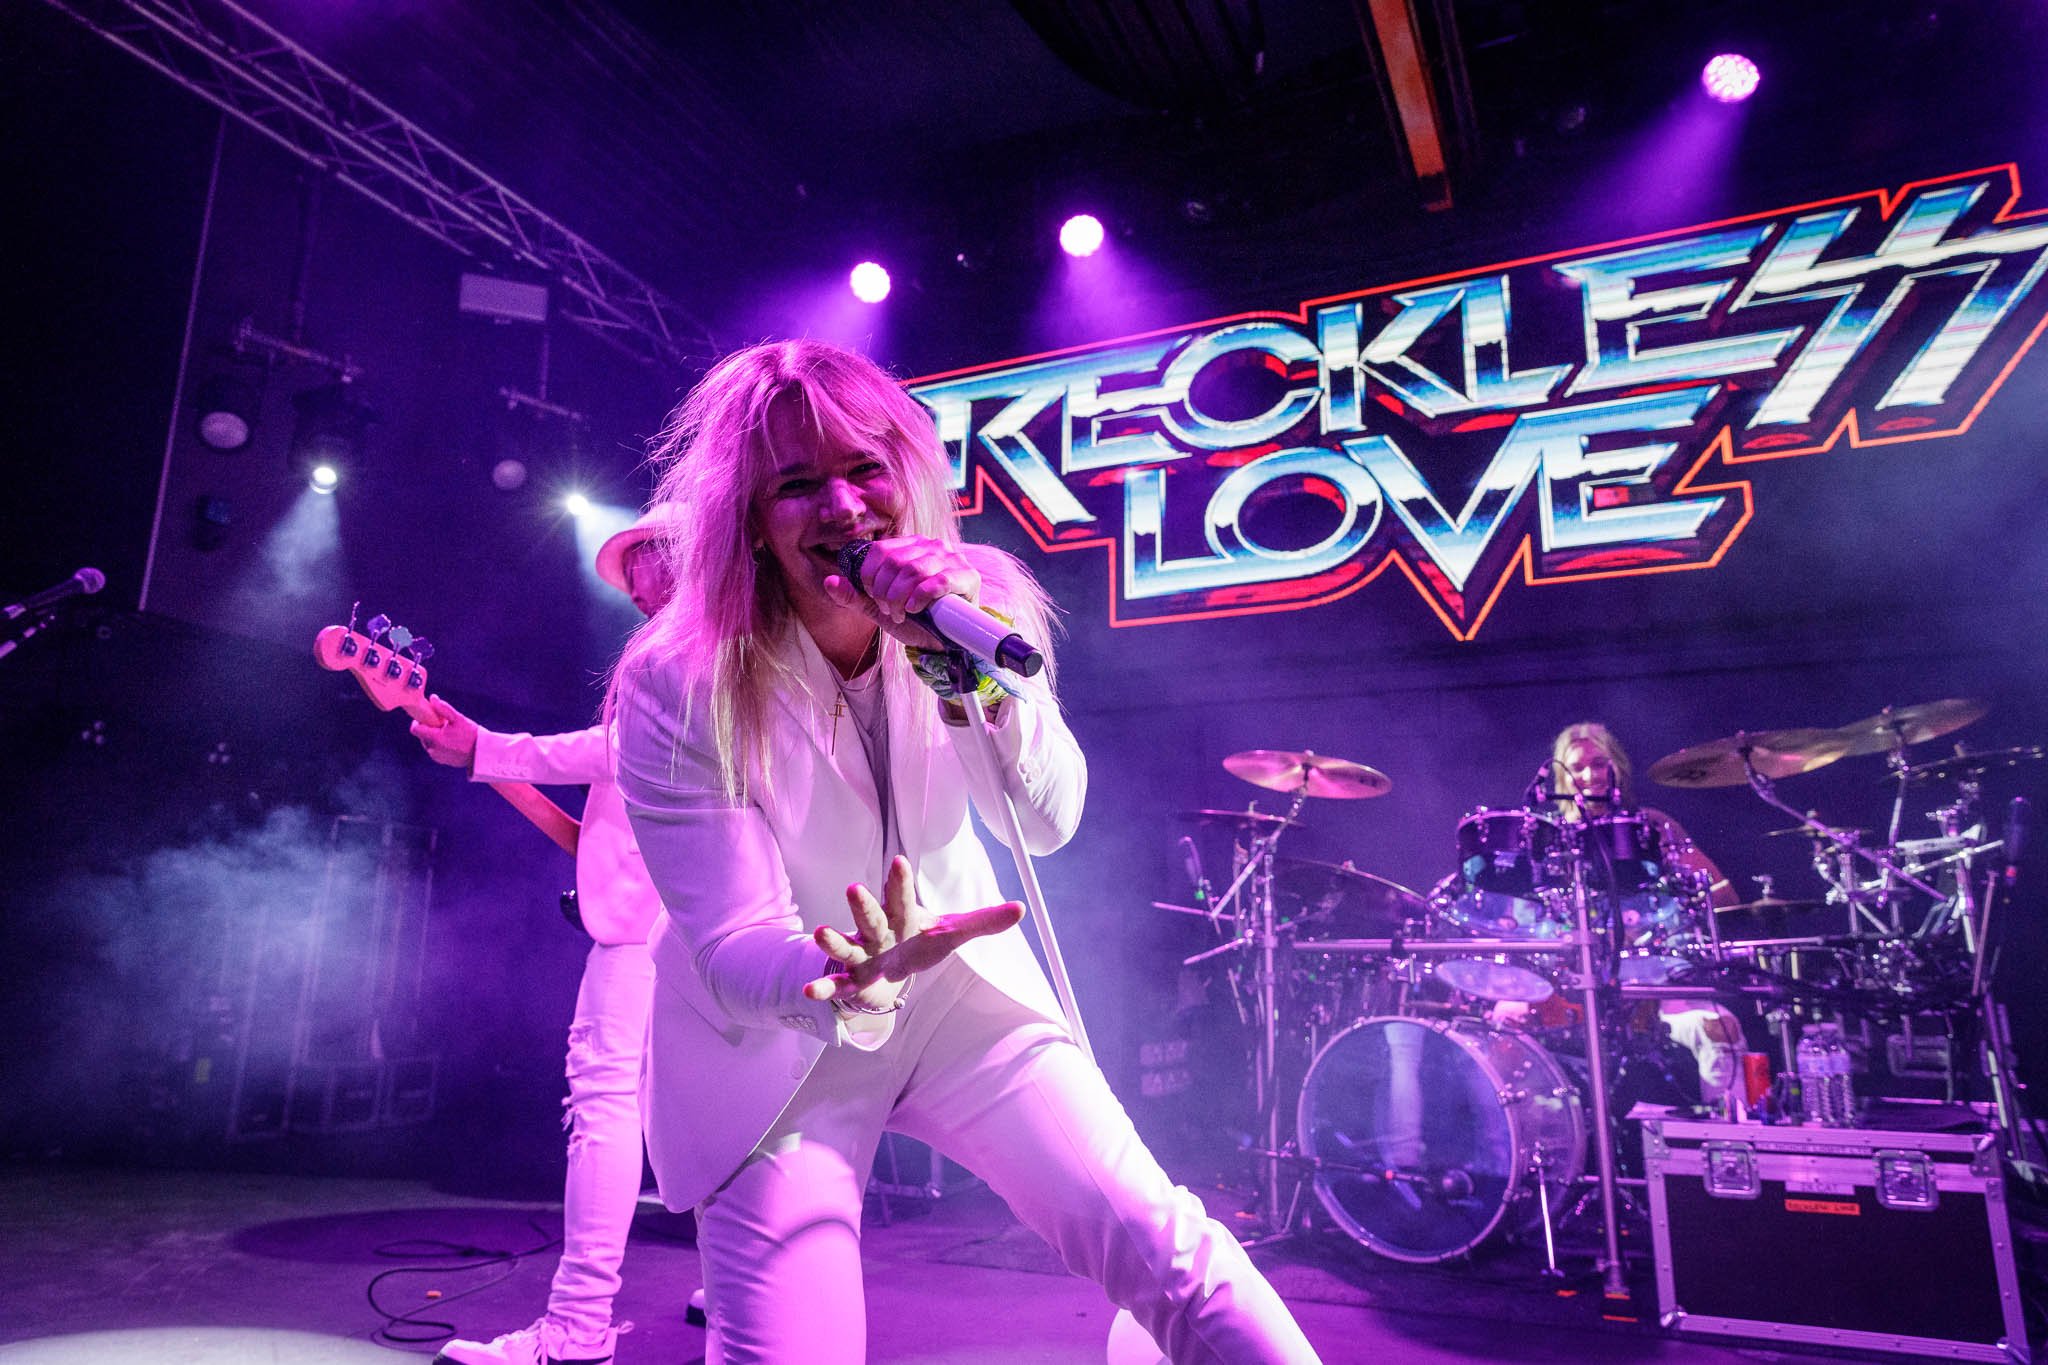 Reckless Love at Hangar 34 in Liverpool on September 3rd 2022 ©